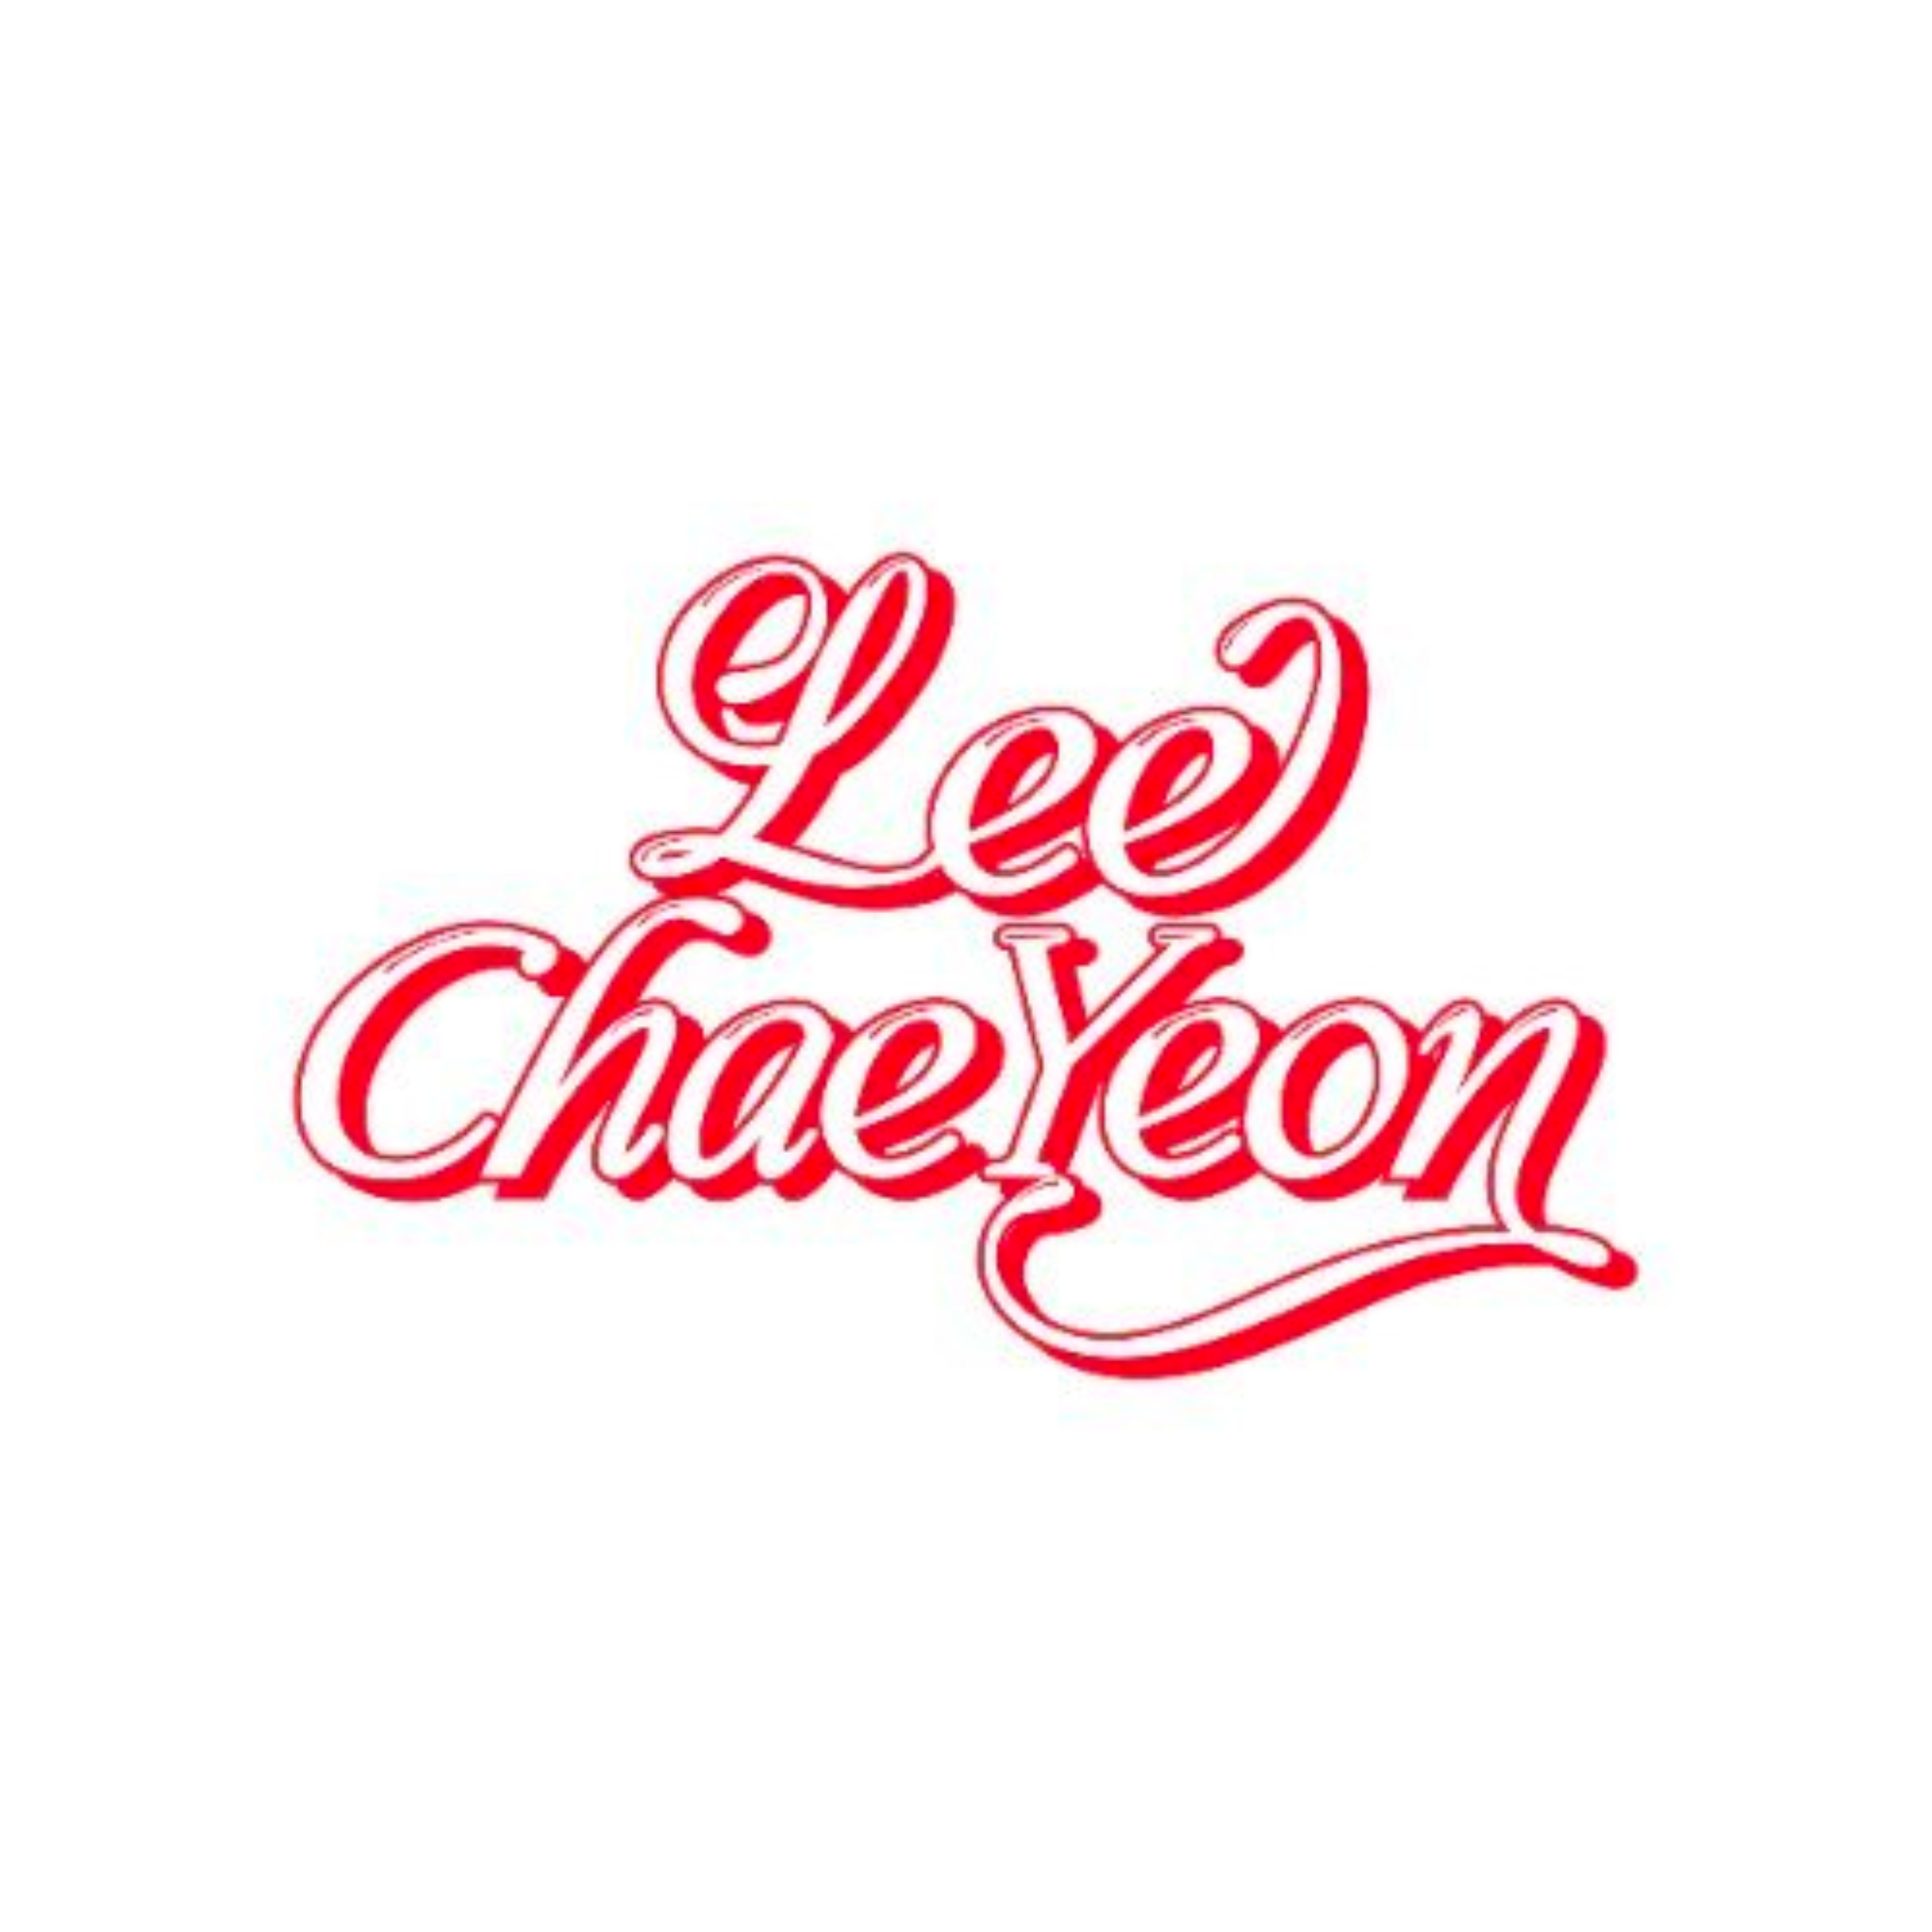 Lee_Chae_Yeon.png